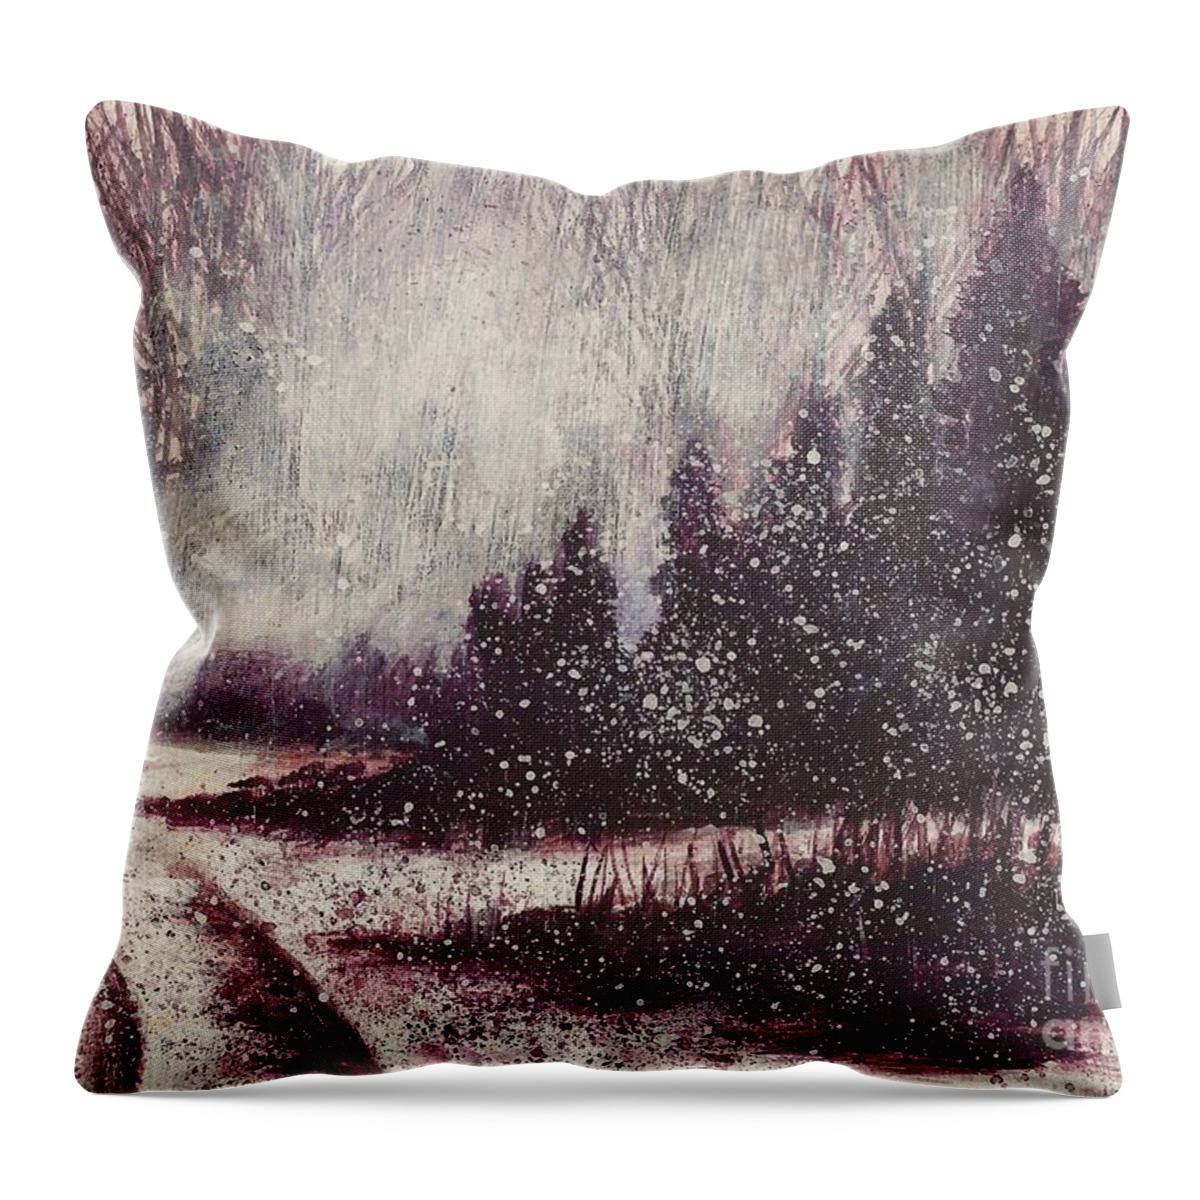 #snow #boulder #colorago #foggy #snowscenes #allisonconstantino #landscape #snow #foggy #foggylandscape Throw Pillow featuring the painting A Hazy Shade of Winter by Allison Constantino